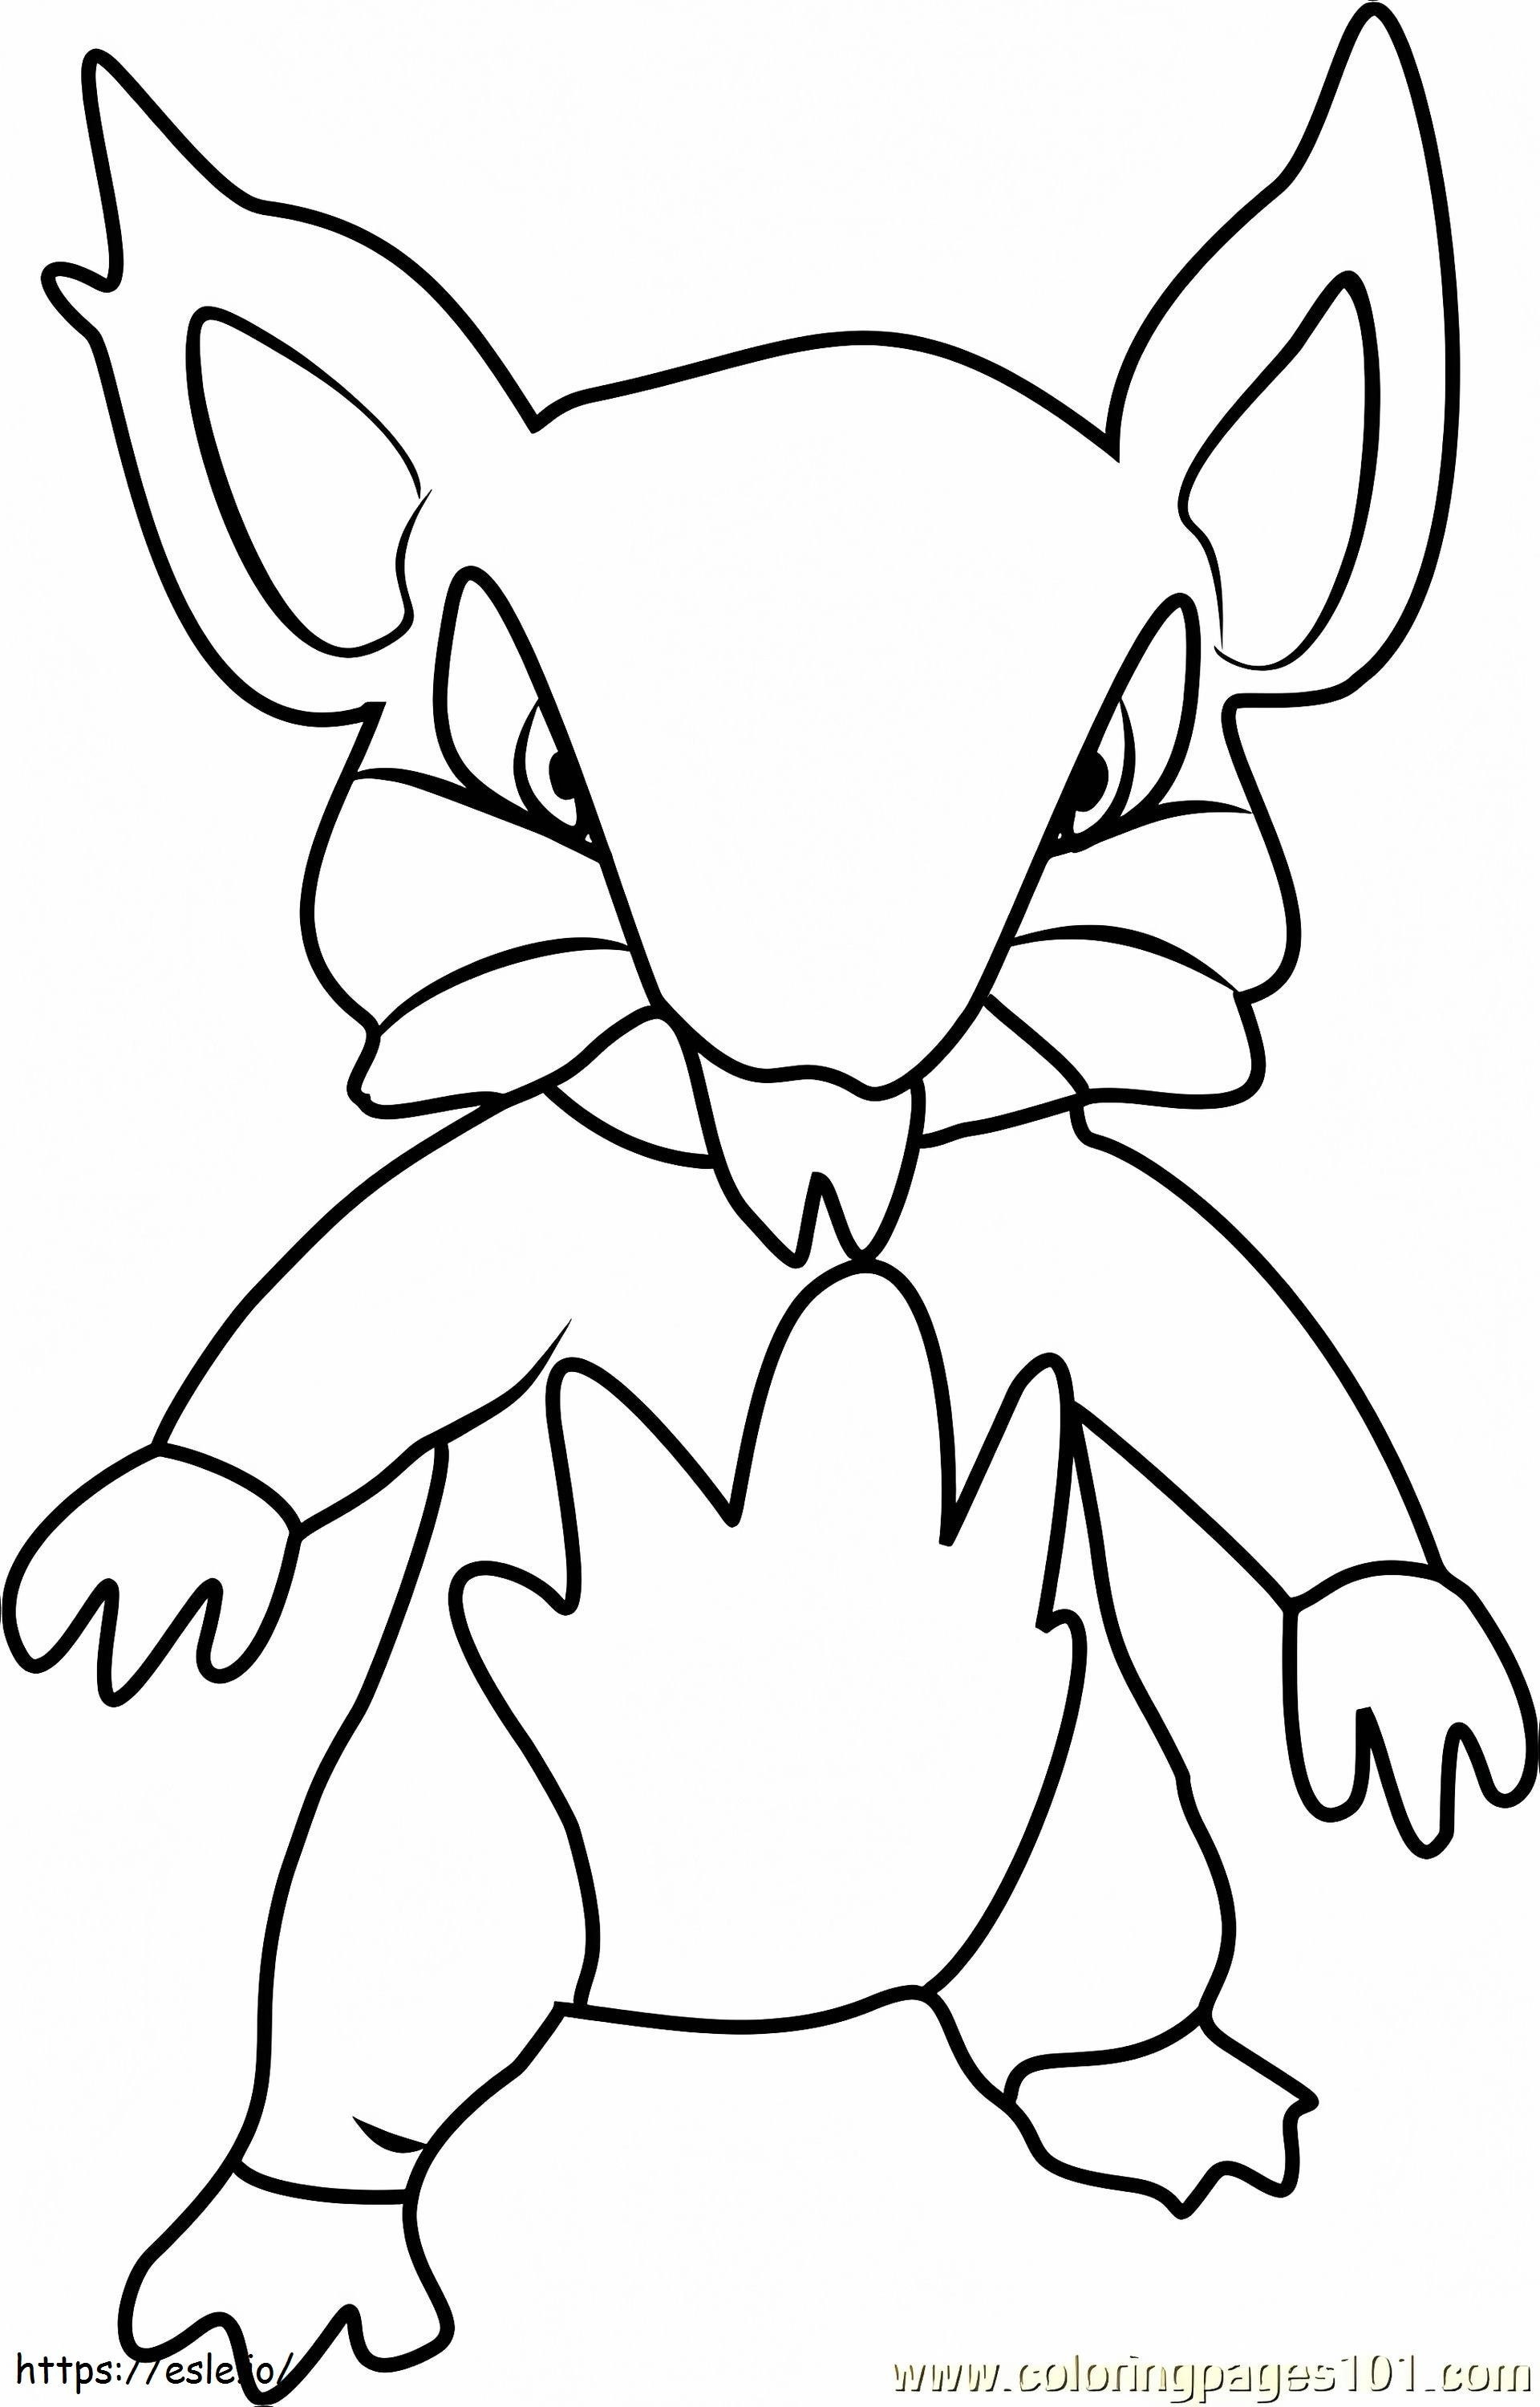 1529718466_52 coloring page